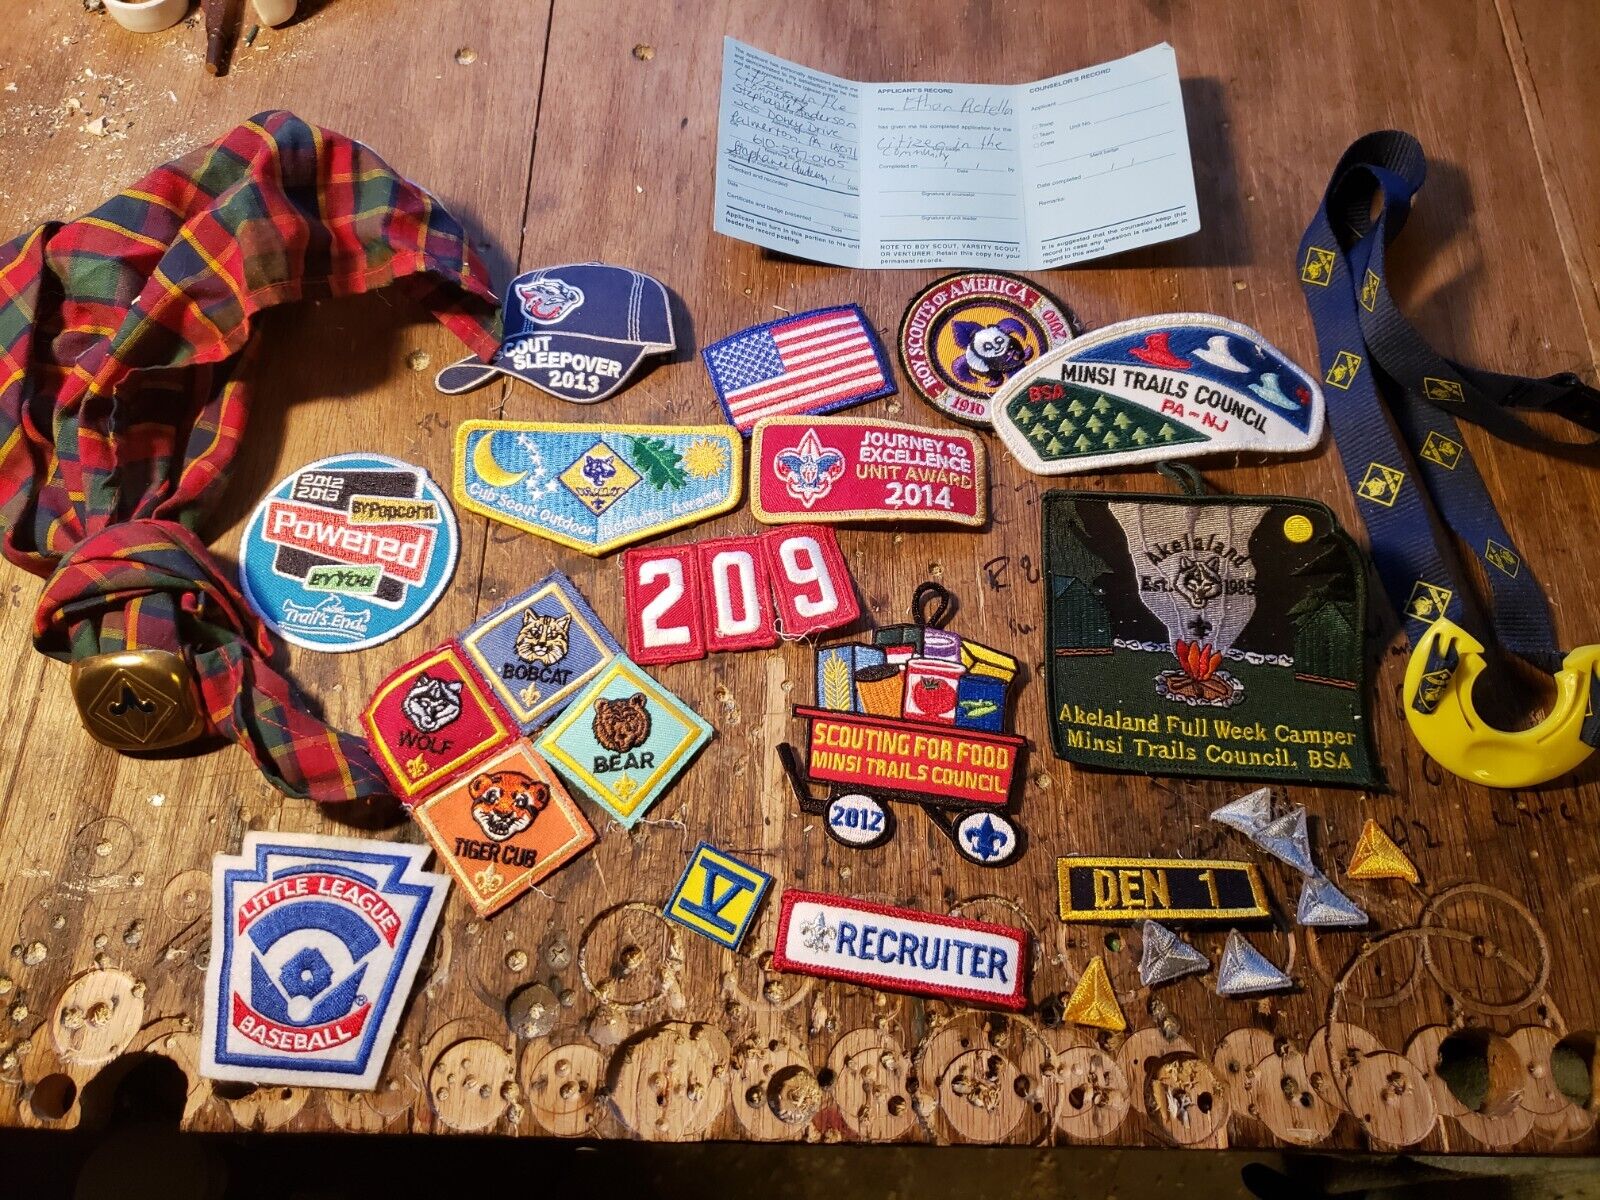 LOT OF EARLY 2012-2014 CUB BOY SCOUT PATCHES  & OTHER ACCESSORIES New & Used